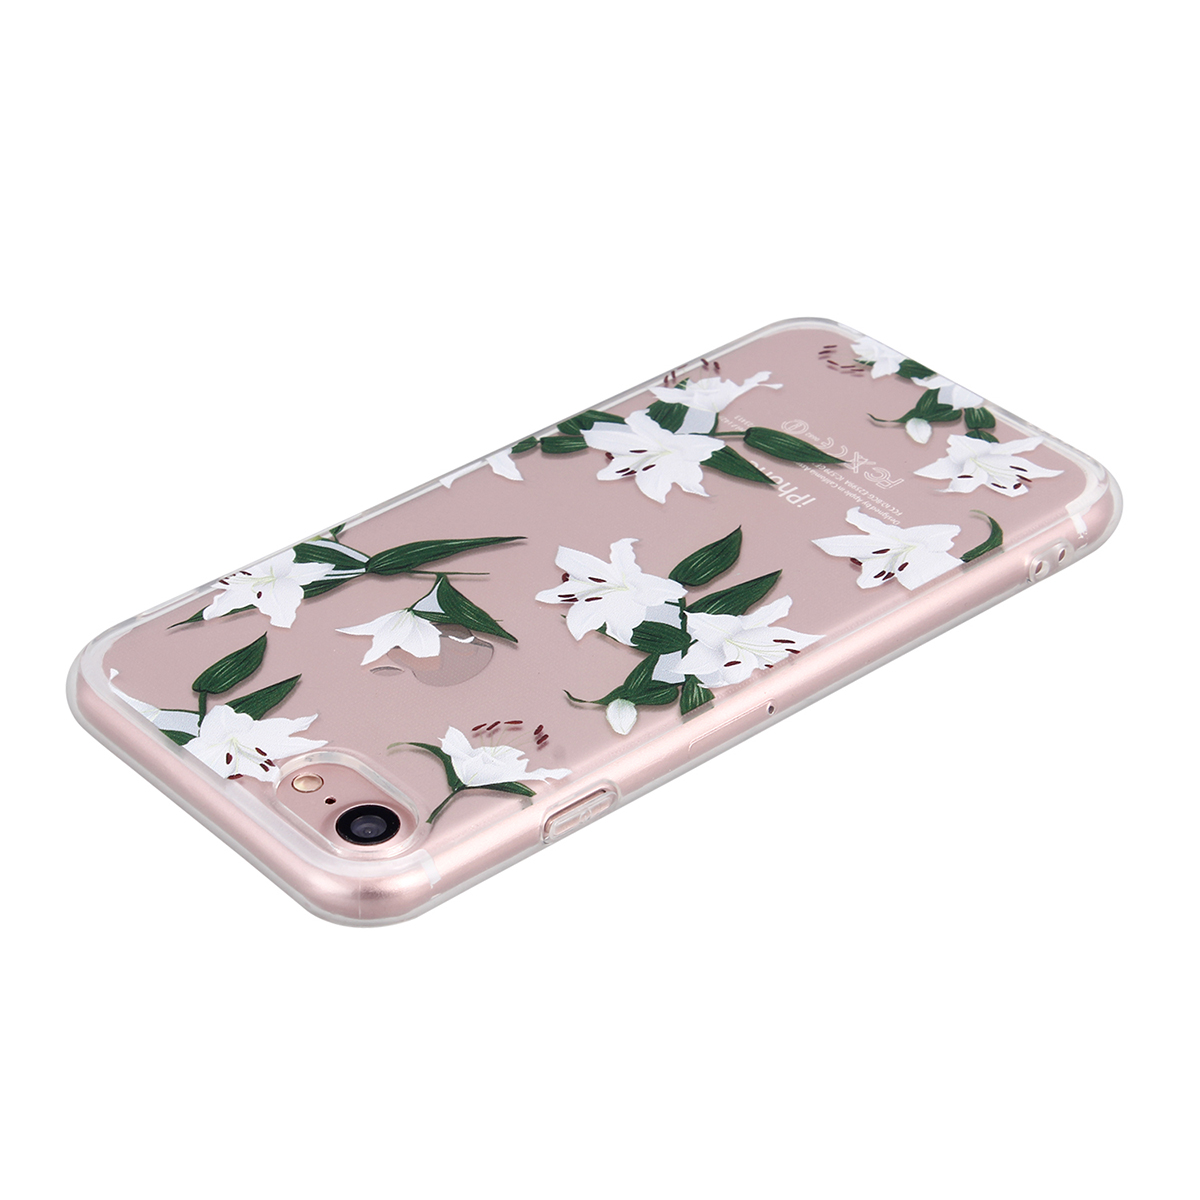 New Slim Soft TPU Transparent Printing Phone Case for iPhone 7 - Greenish Lily Flower